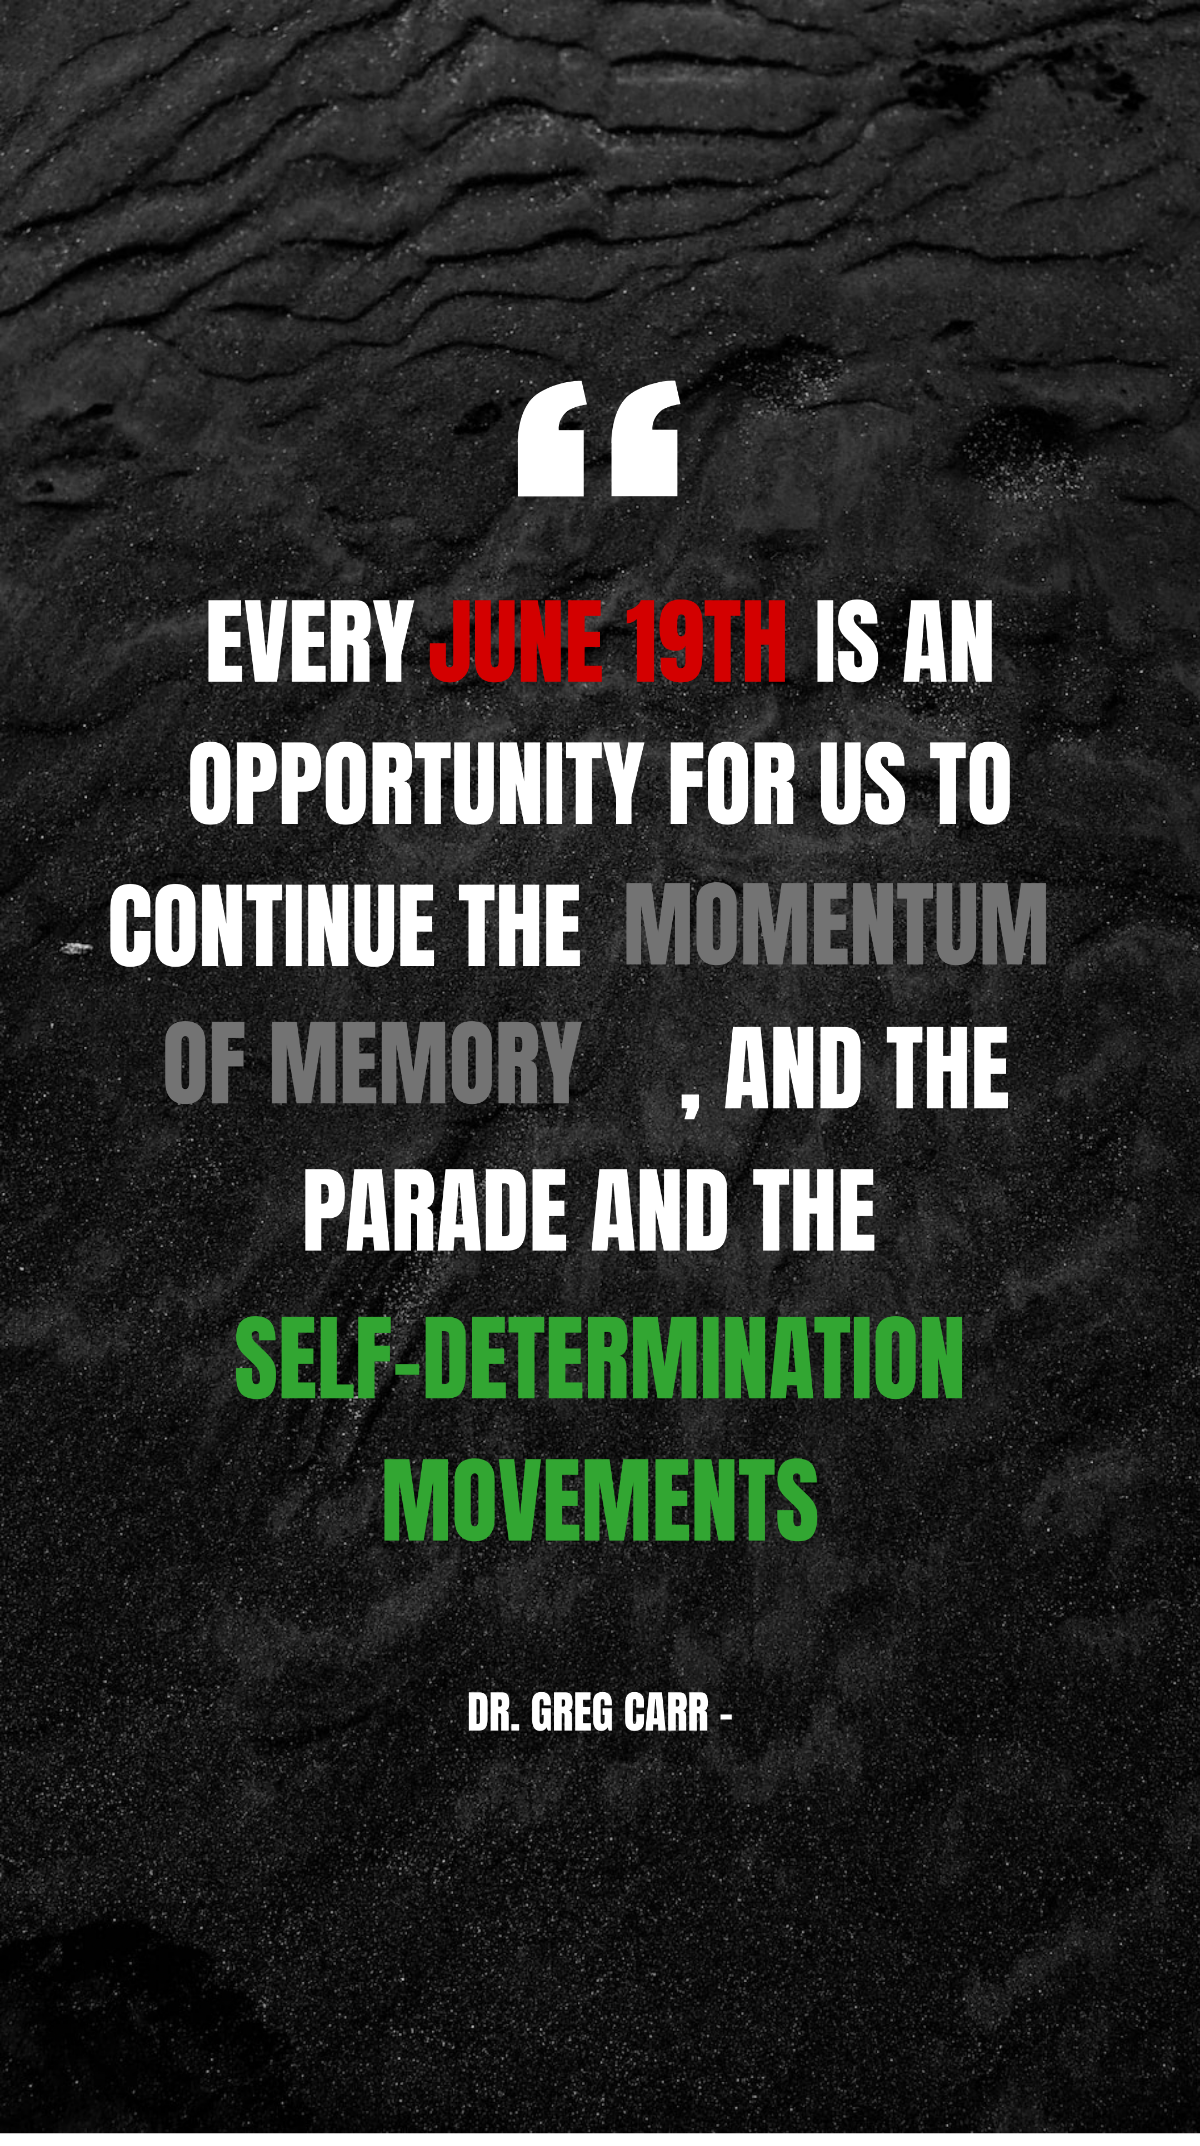 Dr. Greg Carr - Every June 19th is an opportunity for us to continue the momentum of memory, and the parade and the self-determination movements. Template